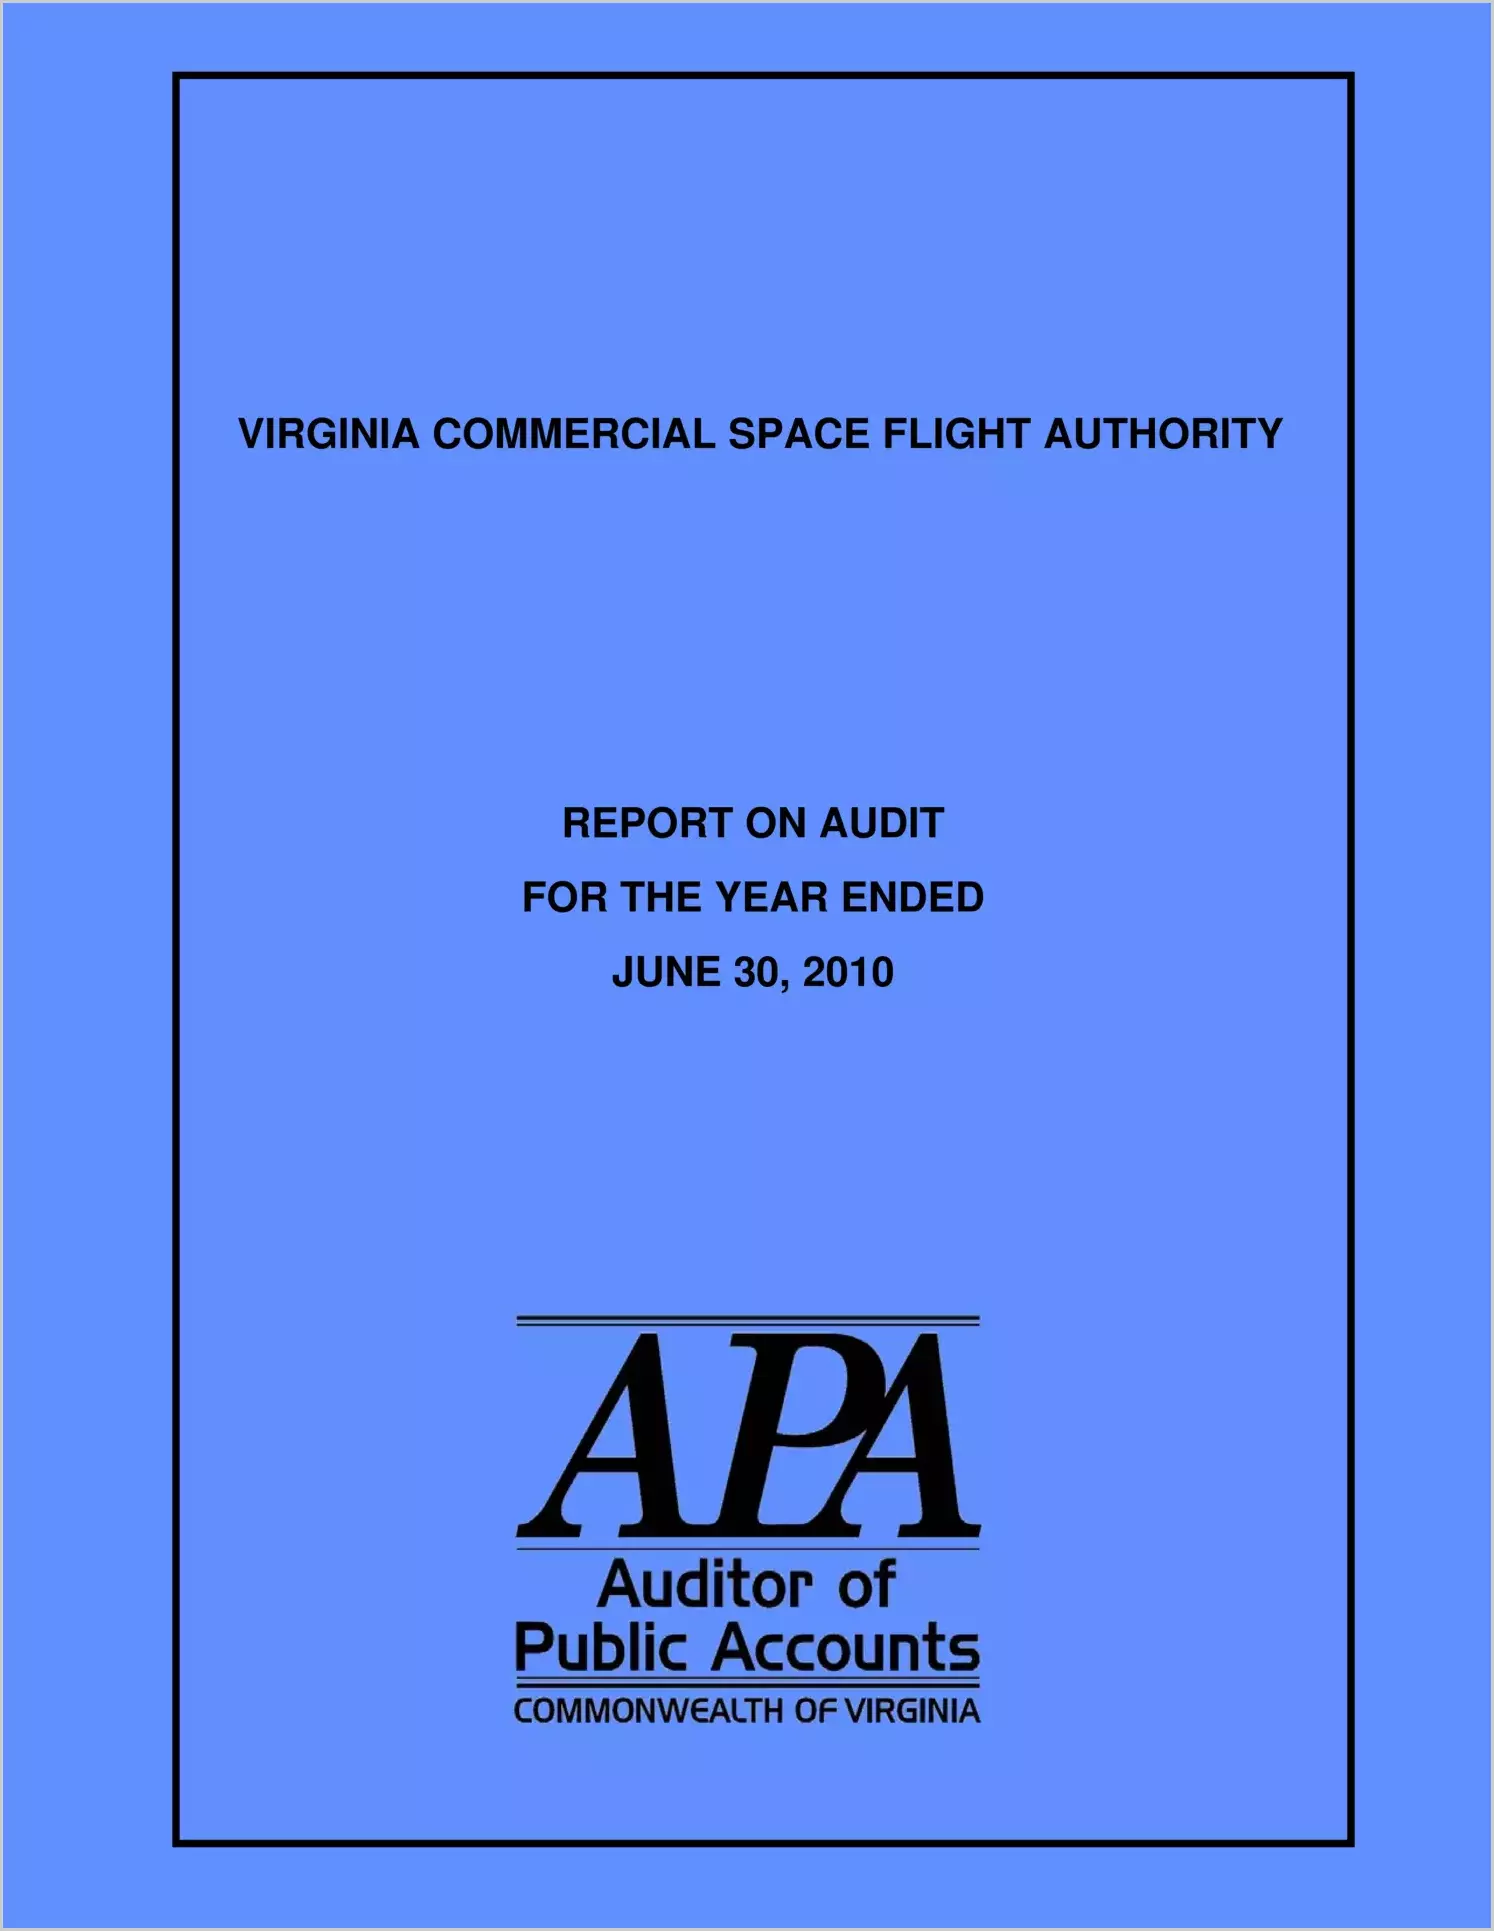 Virginia Commercial Space Flight Authority for the year ended June 30, 2010